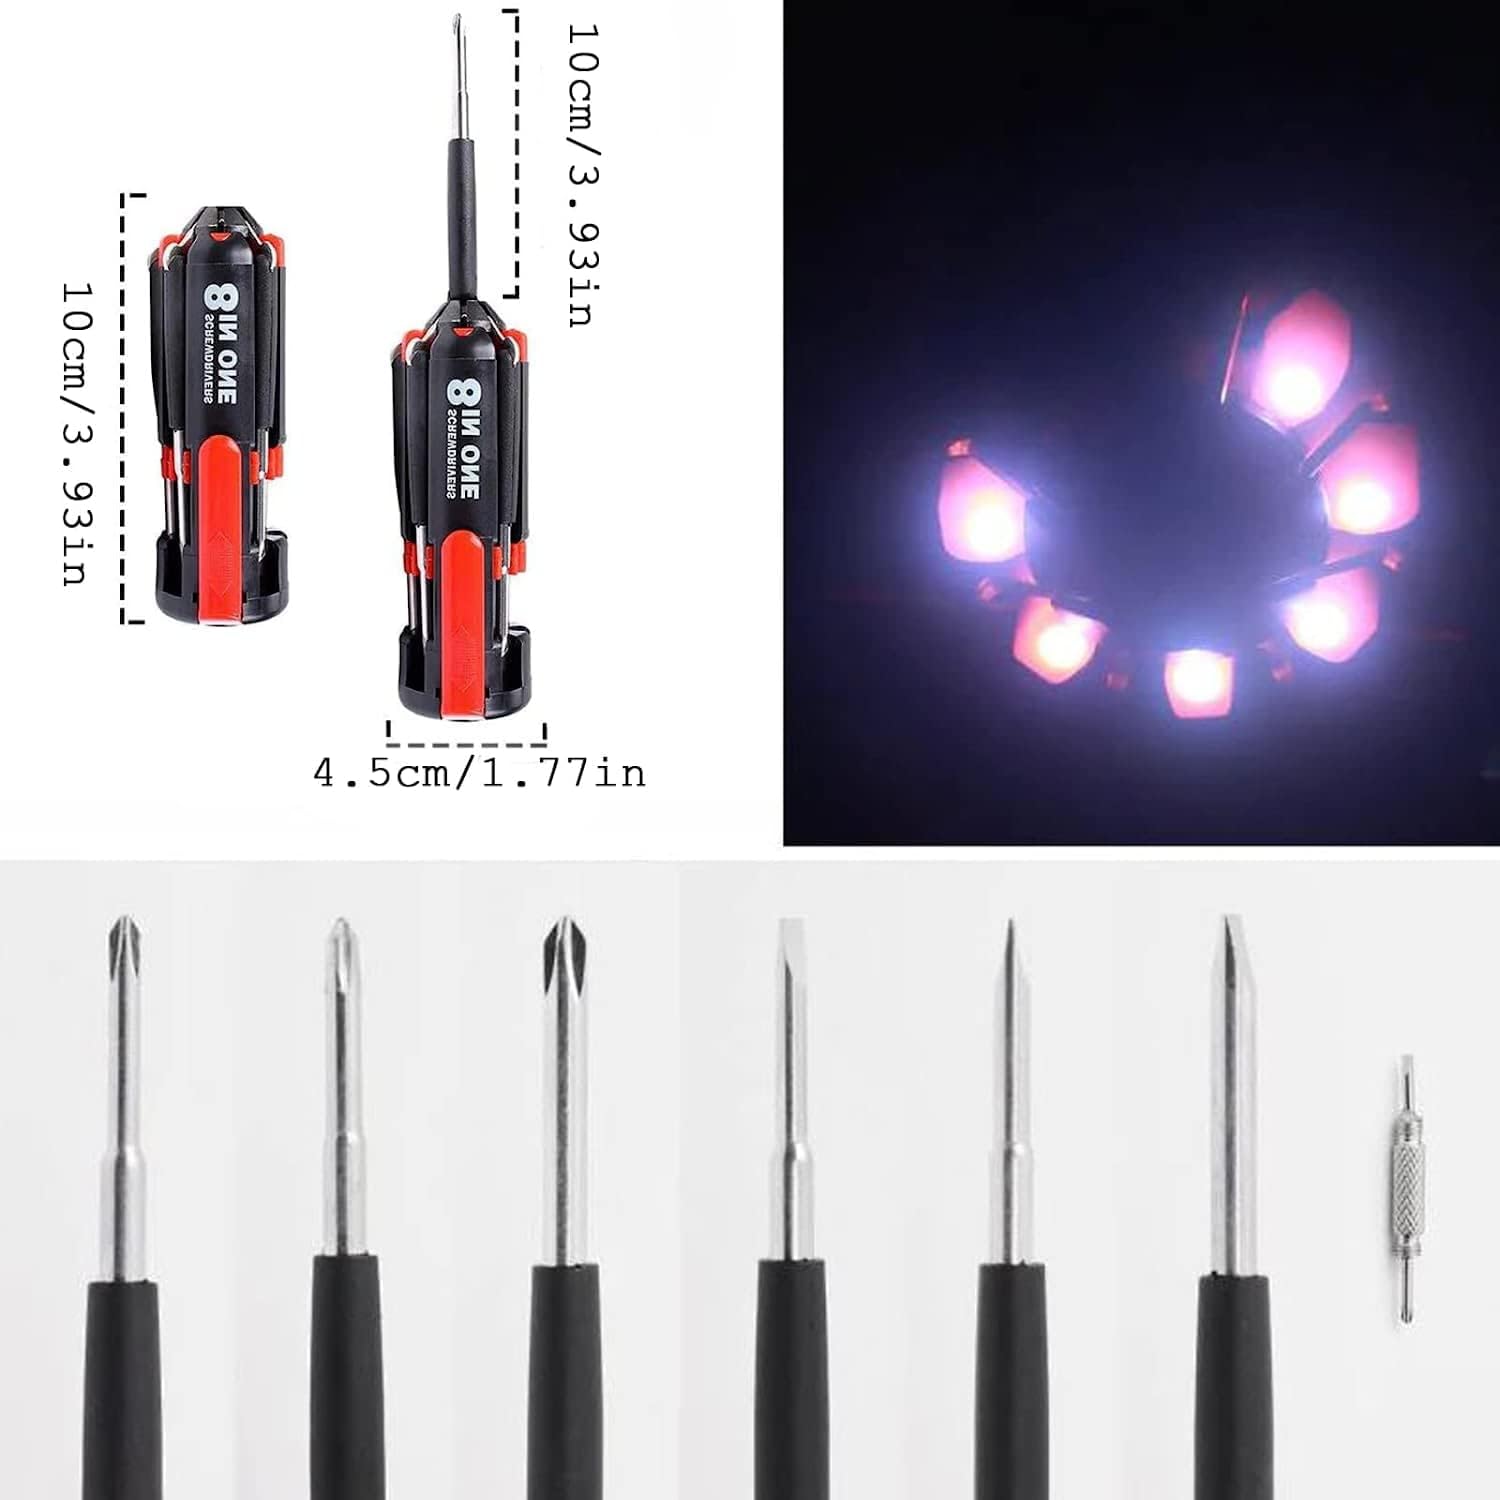 eight in one screwdriver 8 in 1 Screwdrivers with Worklight and Flashlight, Multifunctional Screwdriver for Home Kitchen Car, Portable General Professio